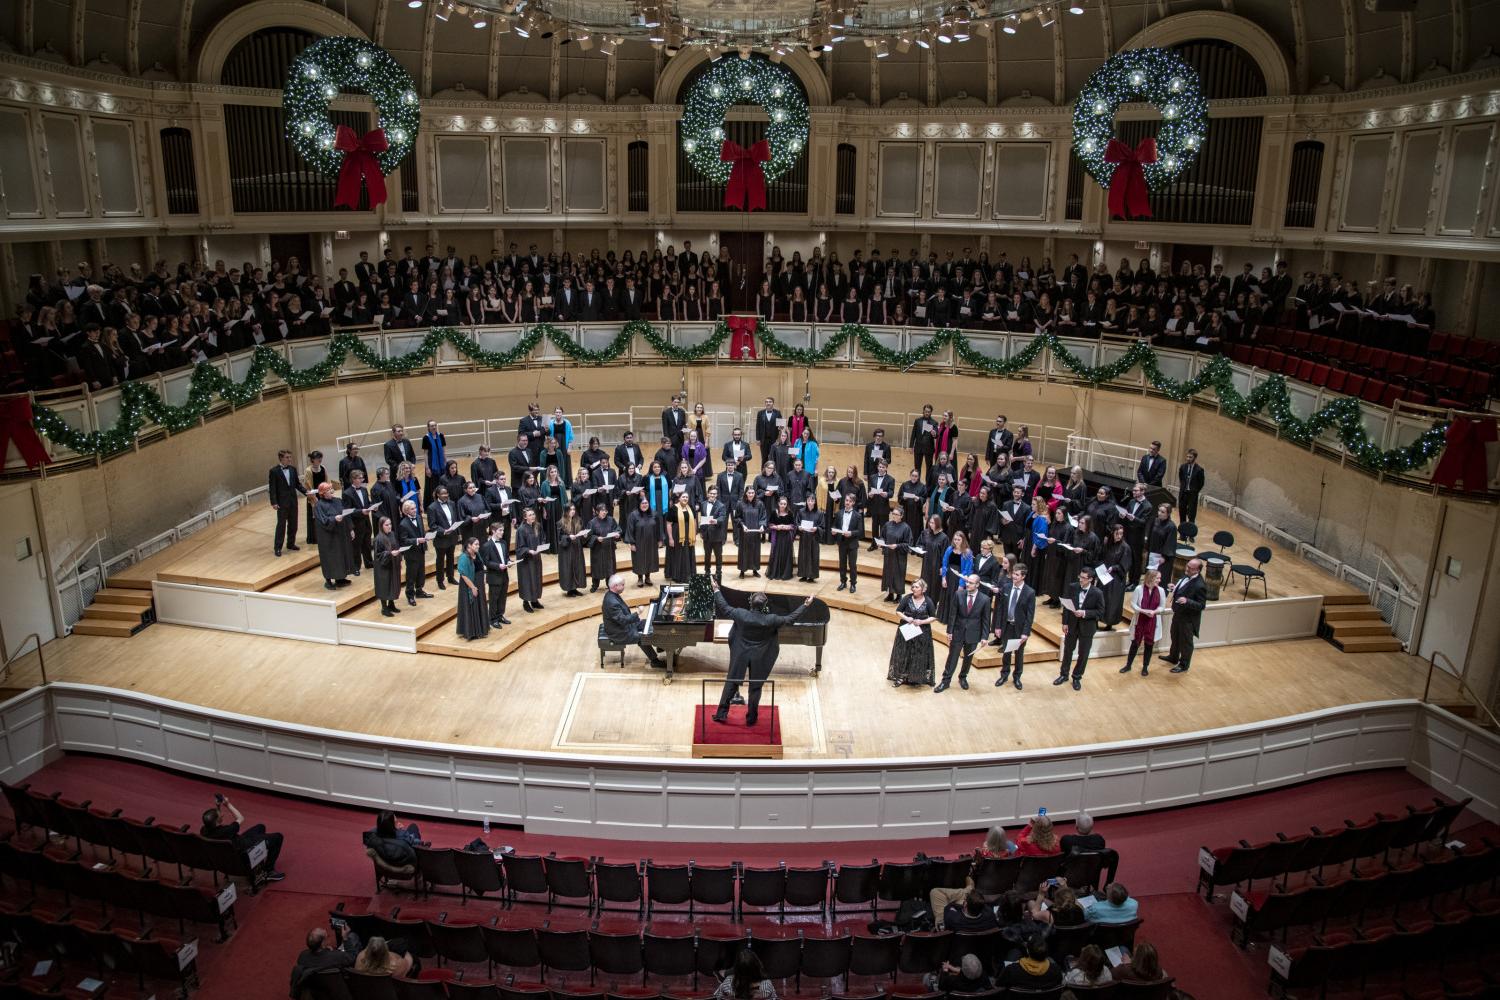 The <a href='http://fnc4.safarinautique.com'>bv伟德ios下载</a> Choir performs in the Chicago Symphony Hall.